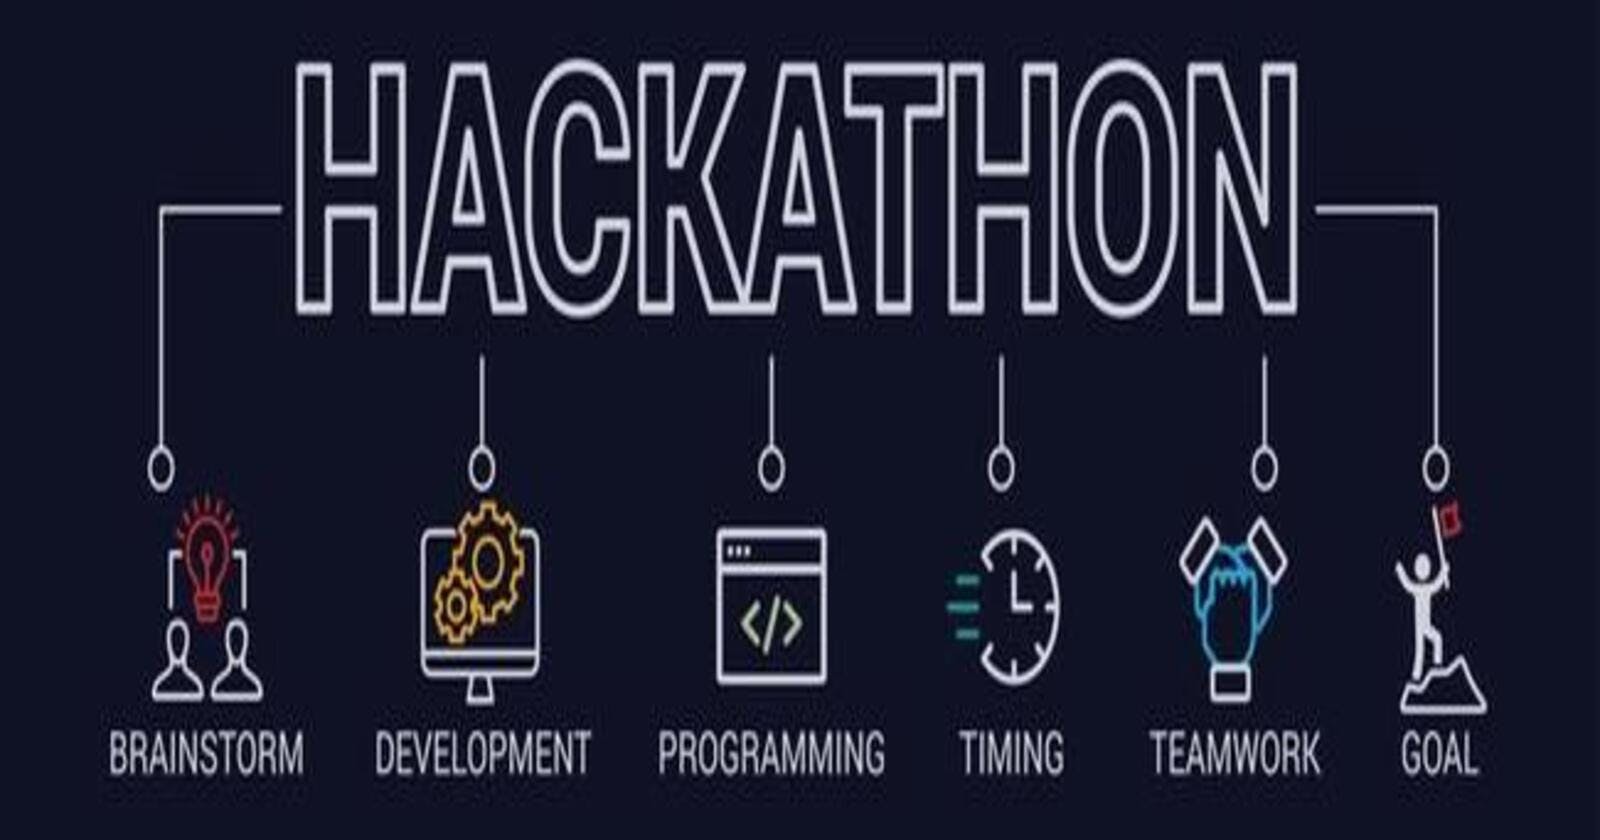 All about hackathons